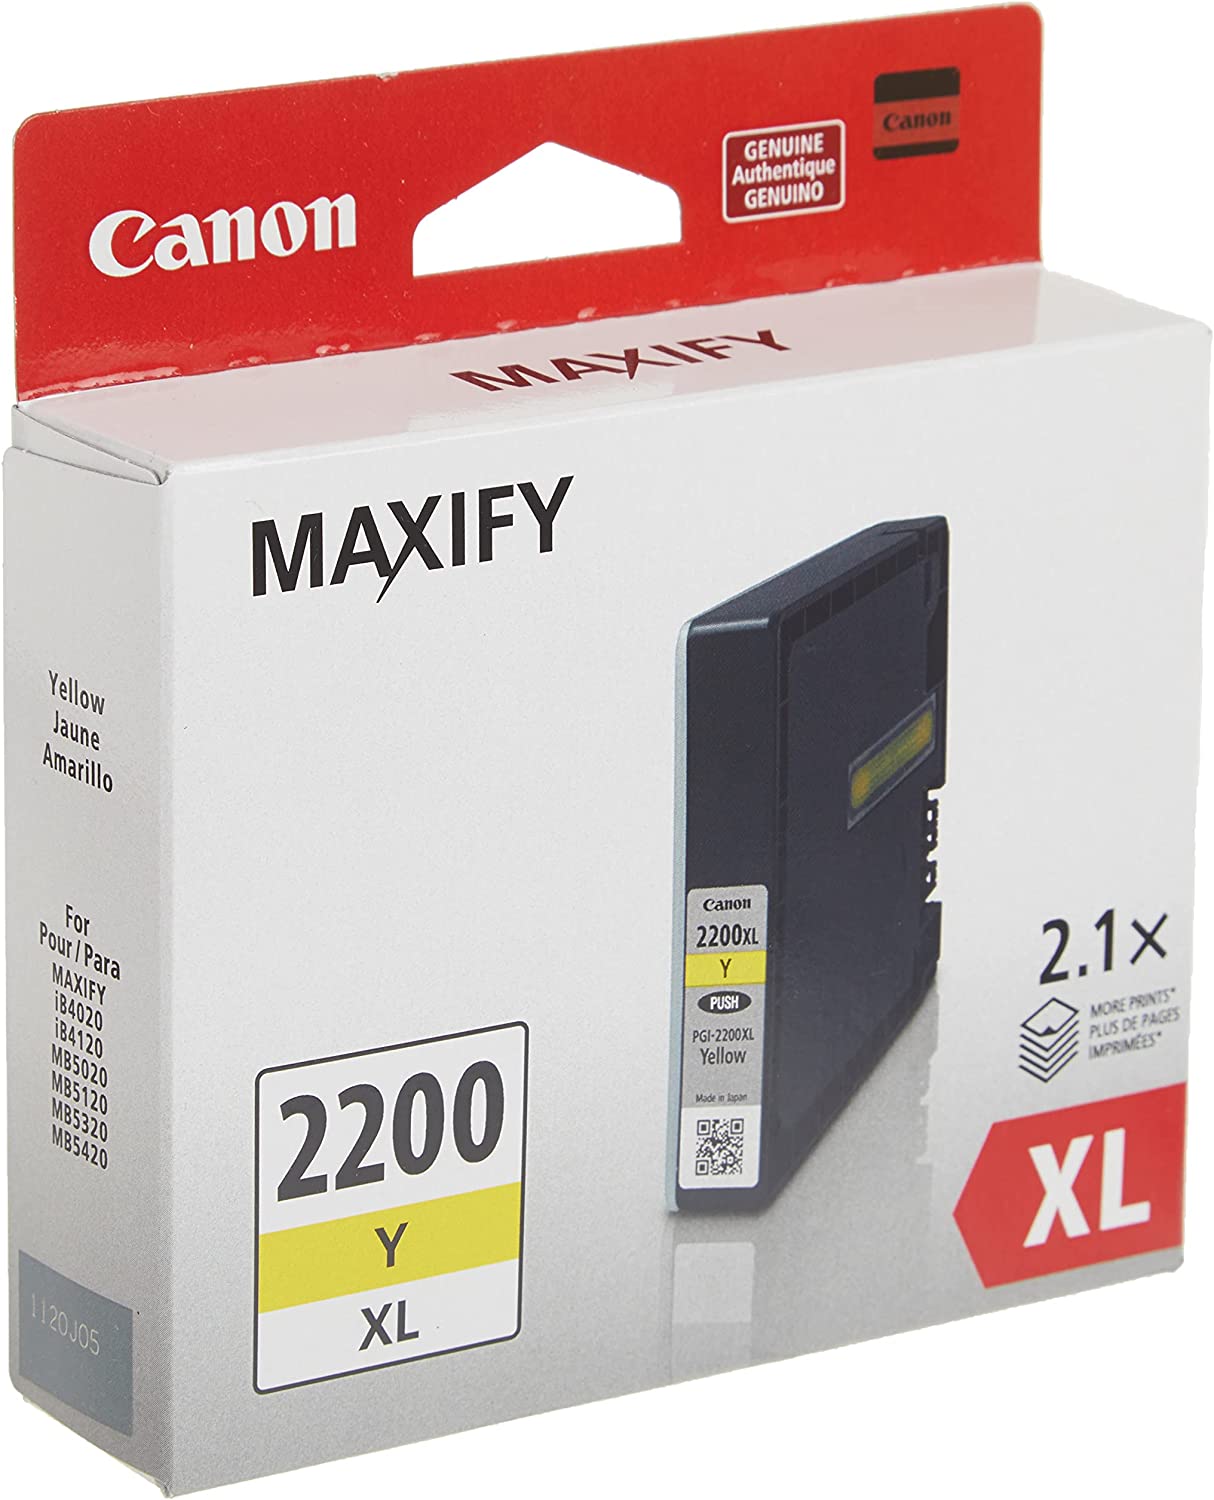 Canon PGI-2200XL Yellow Ink-Tank Compatible to IB4120, MB5420, MB5120, IB4020, MB5020, MB5320 CanonInk MAXIFY PGI-2200 XL Yellow Pigment Ink Tank